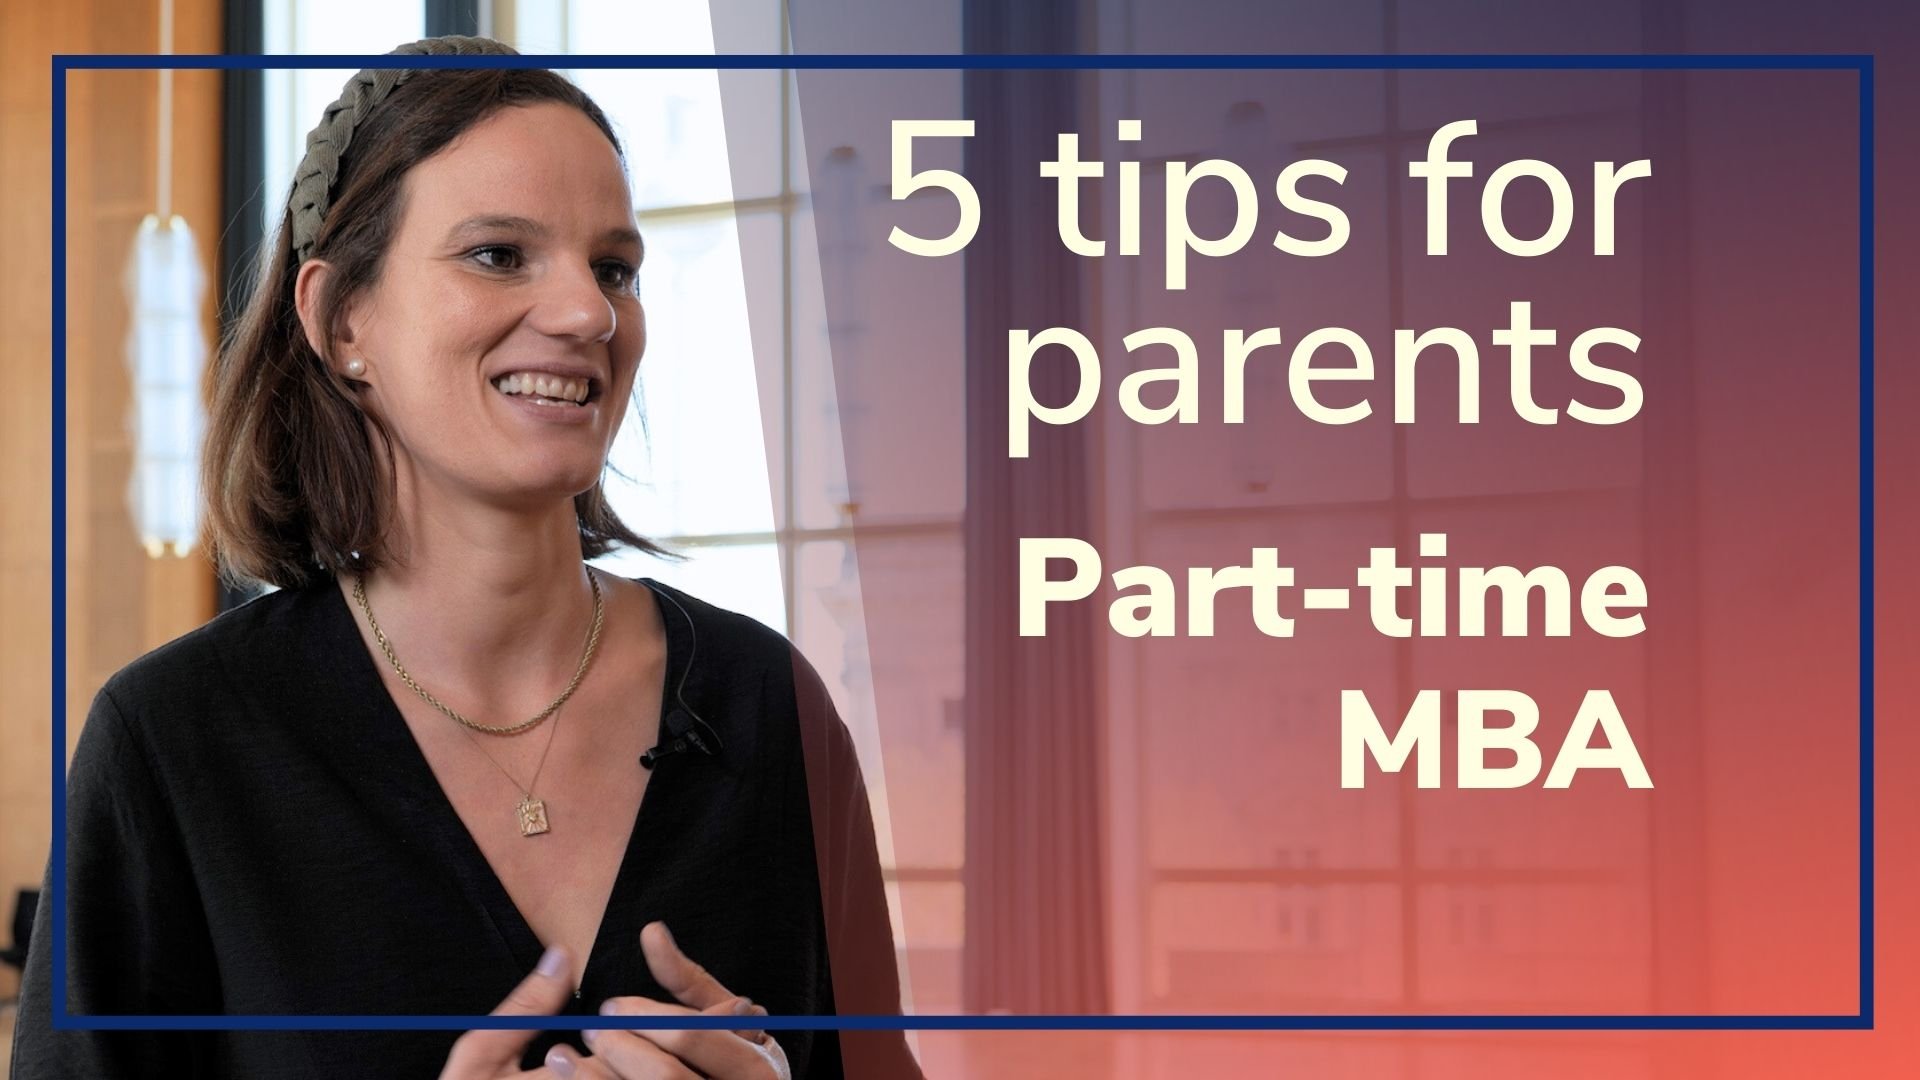 PTMBA - 5 tips for parents - Video cover